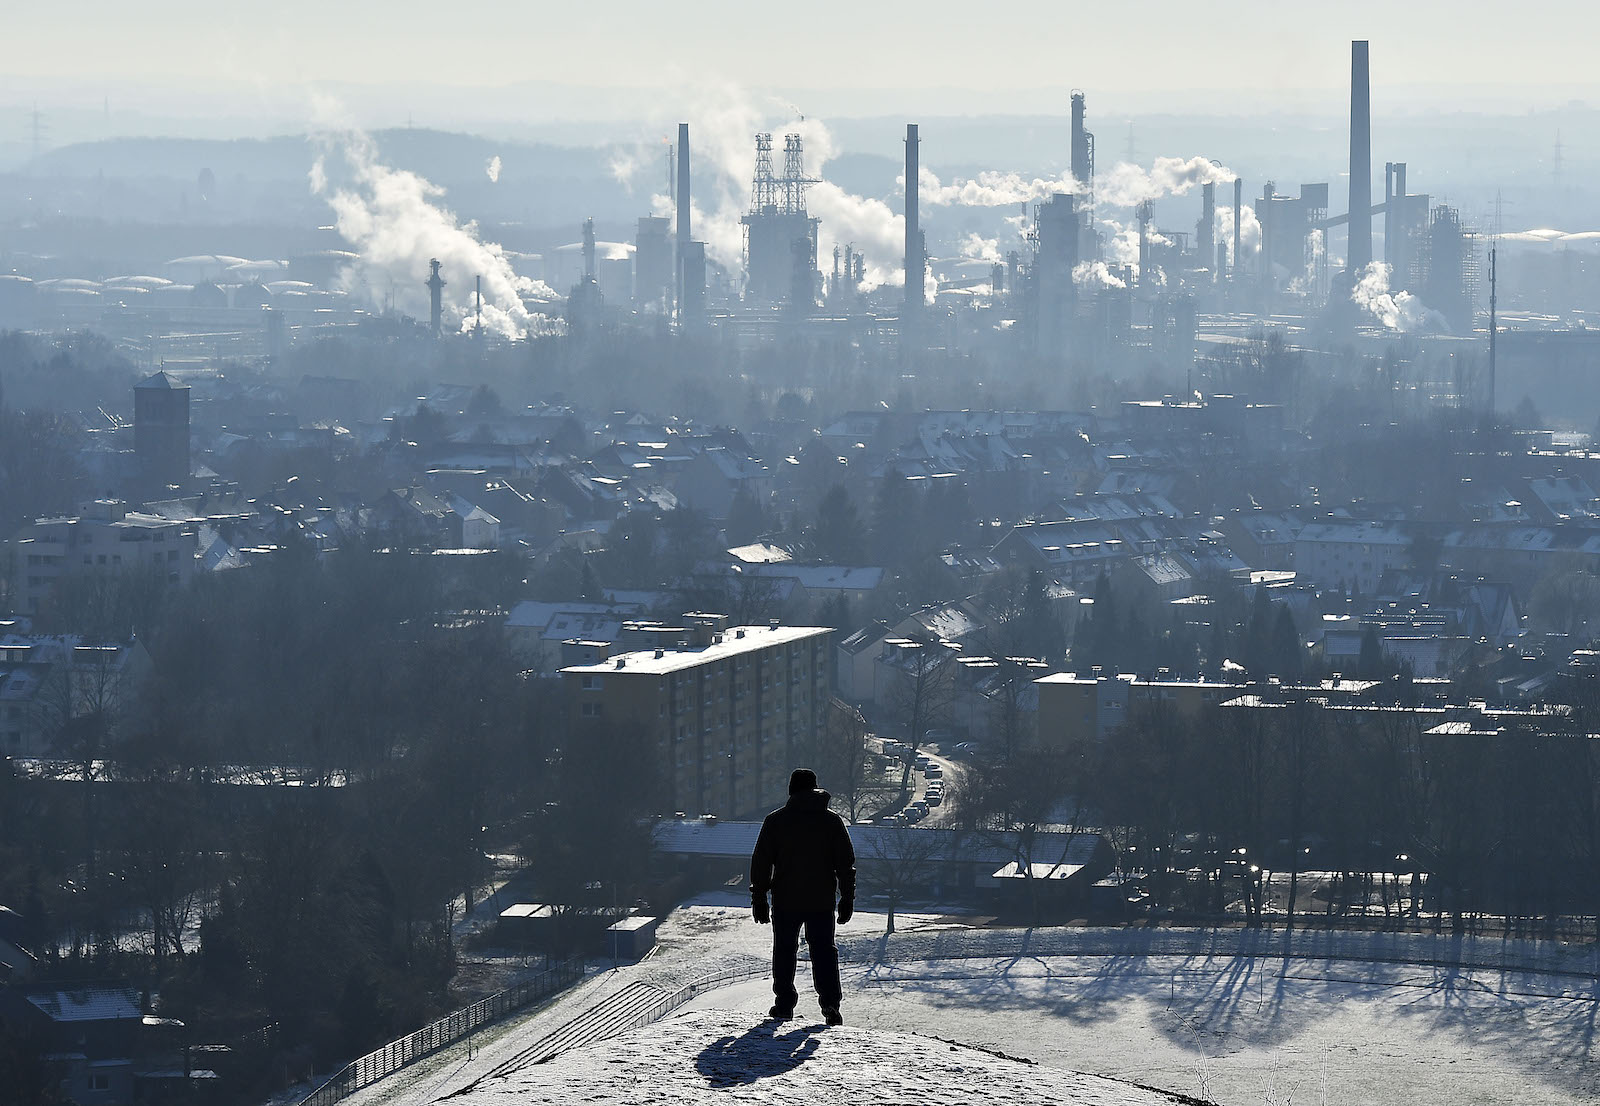 Man looks at refinery in distance